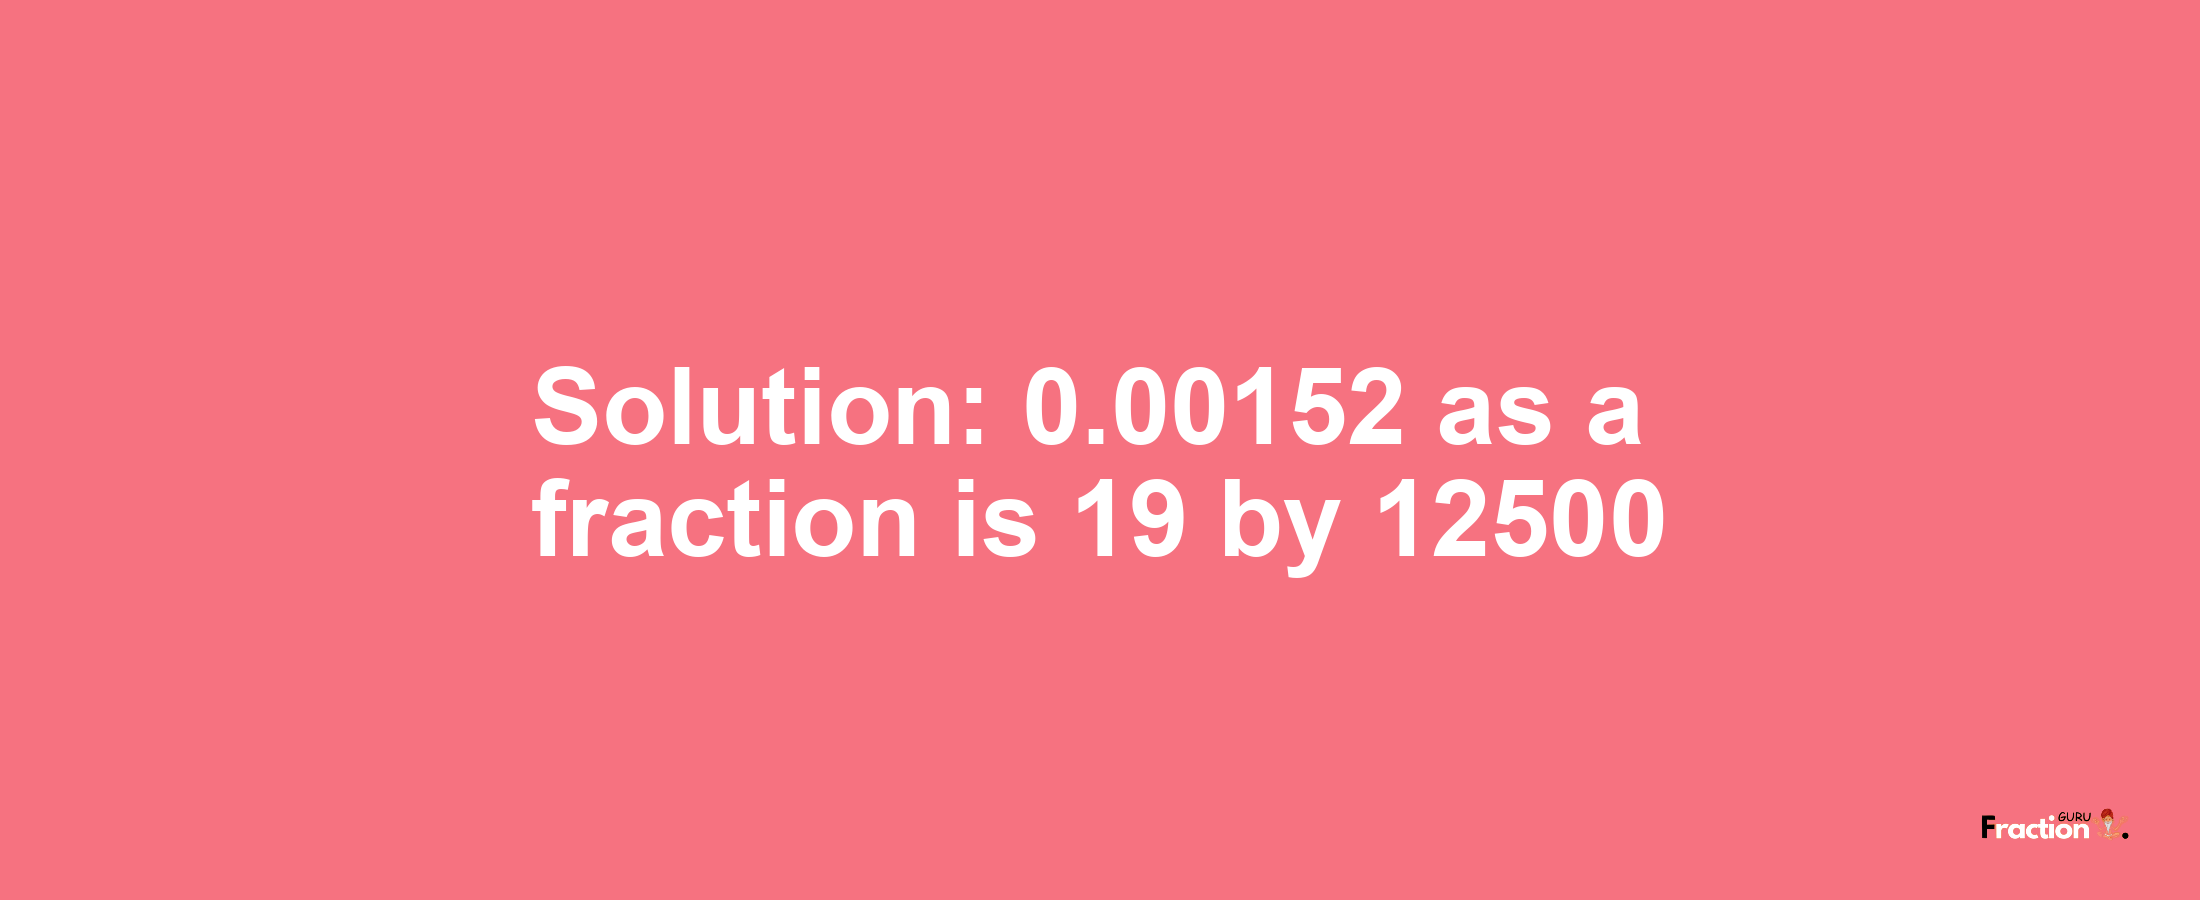 Solution:0.00152 as a fraction is 19/12500